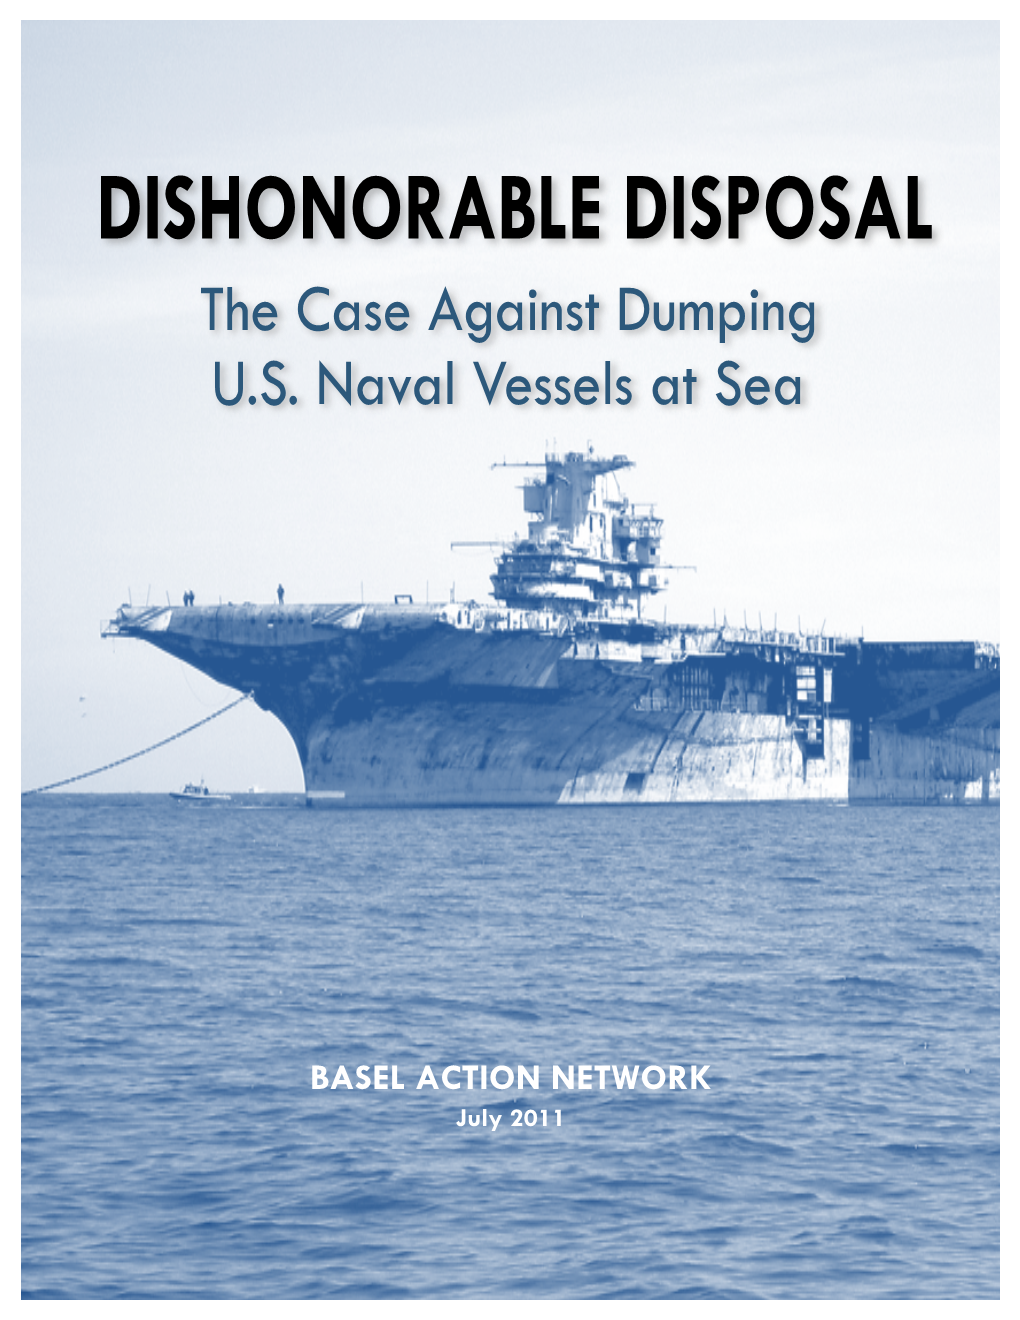 DISHONORABLE DISPOSAL the Case Against Dumping U.S